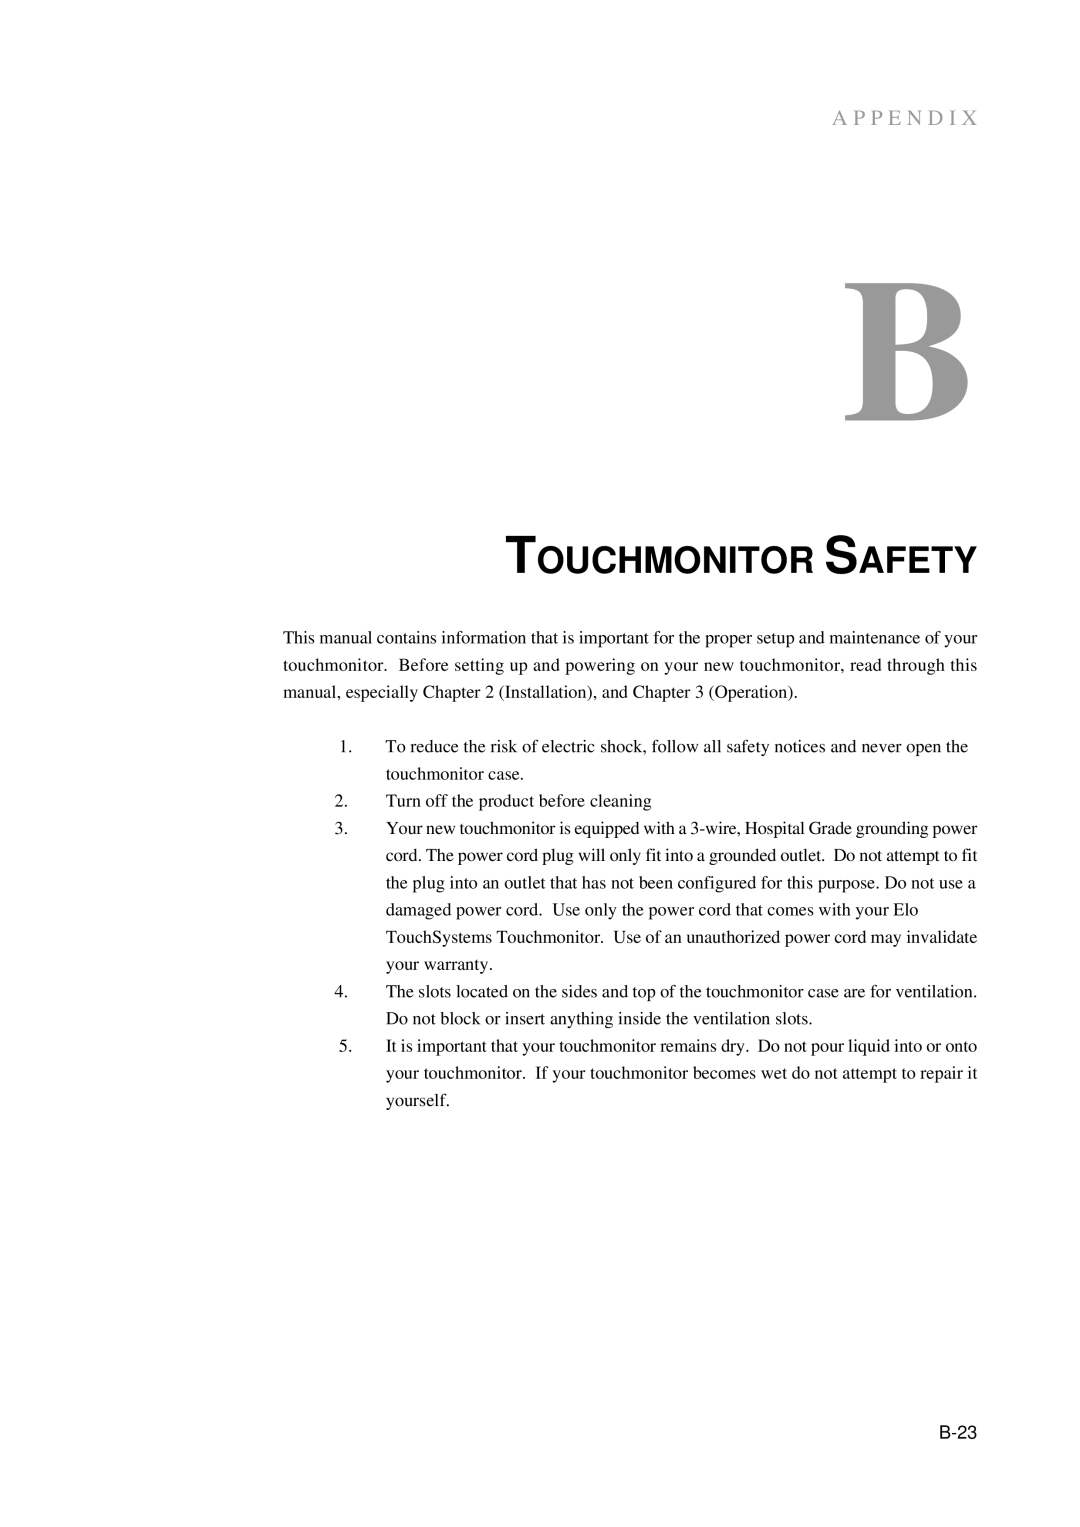 Elo TouchSystems 5000 Series, E791522 manual Touchmonitor Safety 